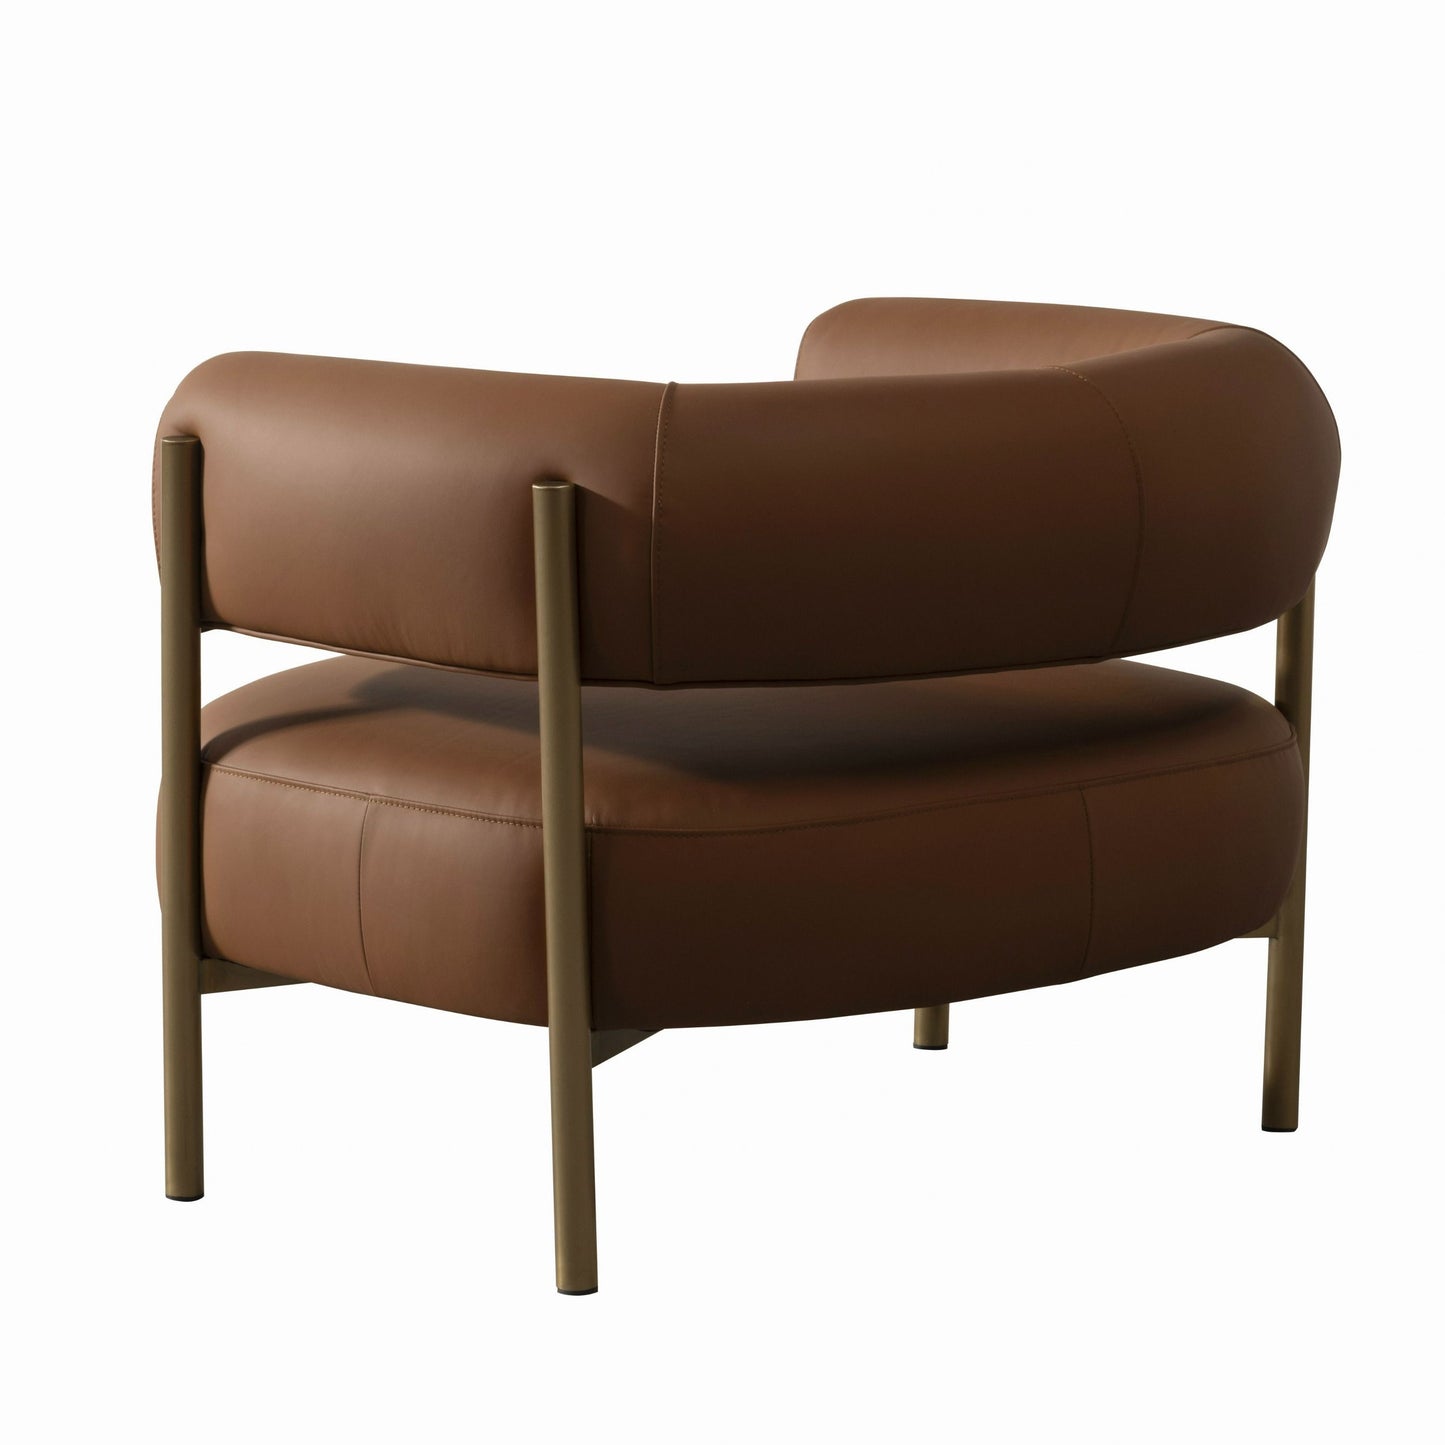 Modrest Ozona - Modern Rust Leather Accent Chair